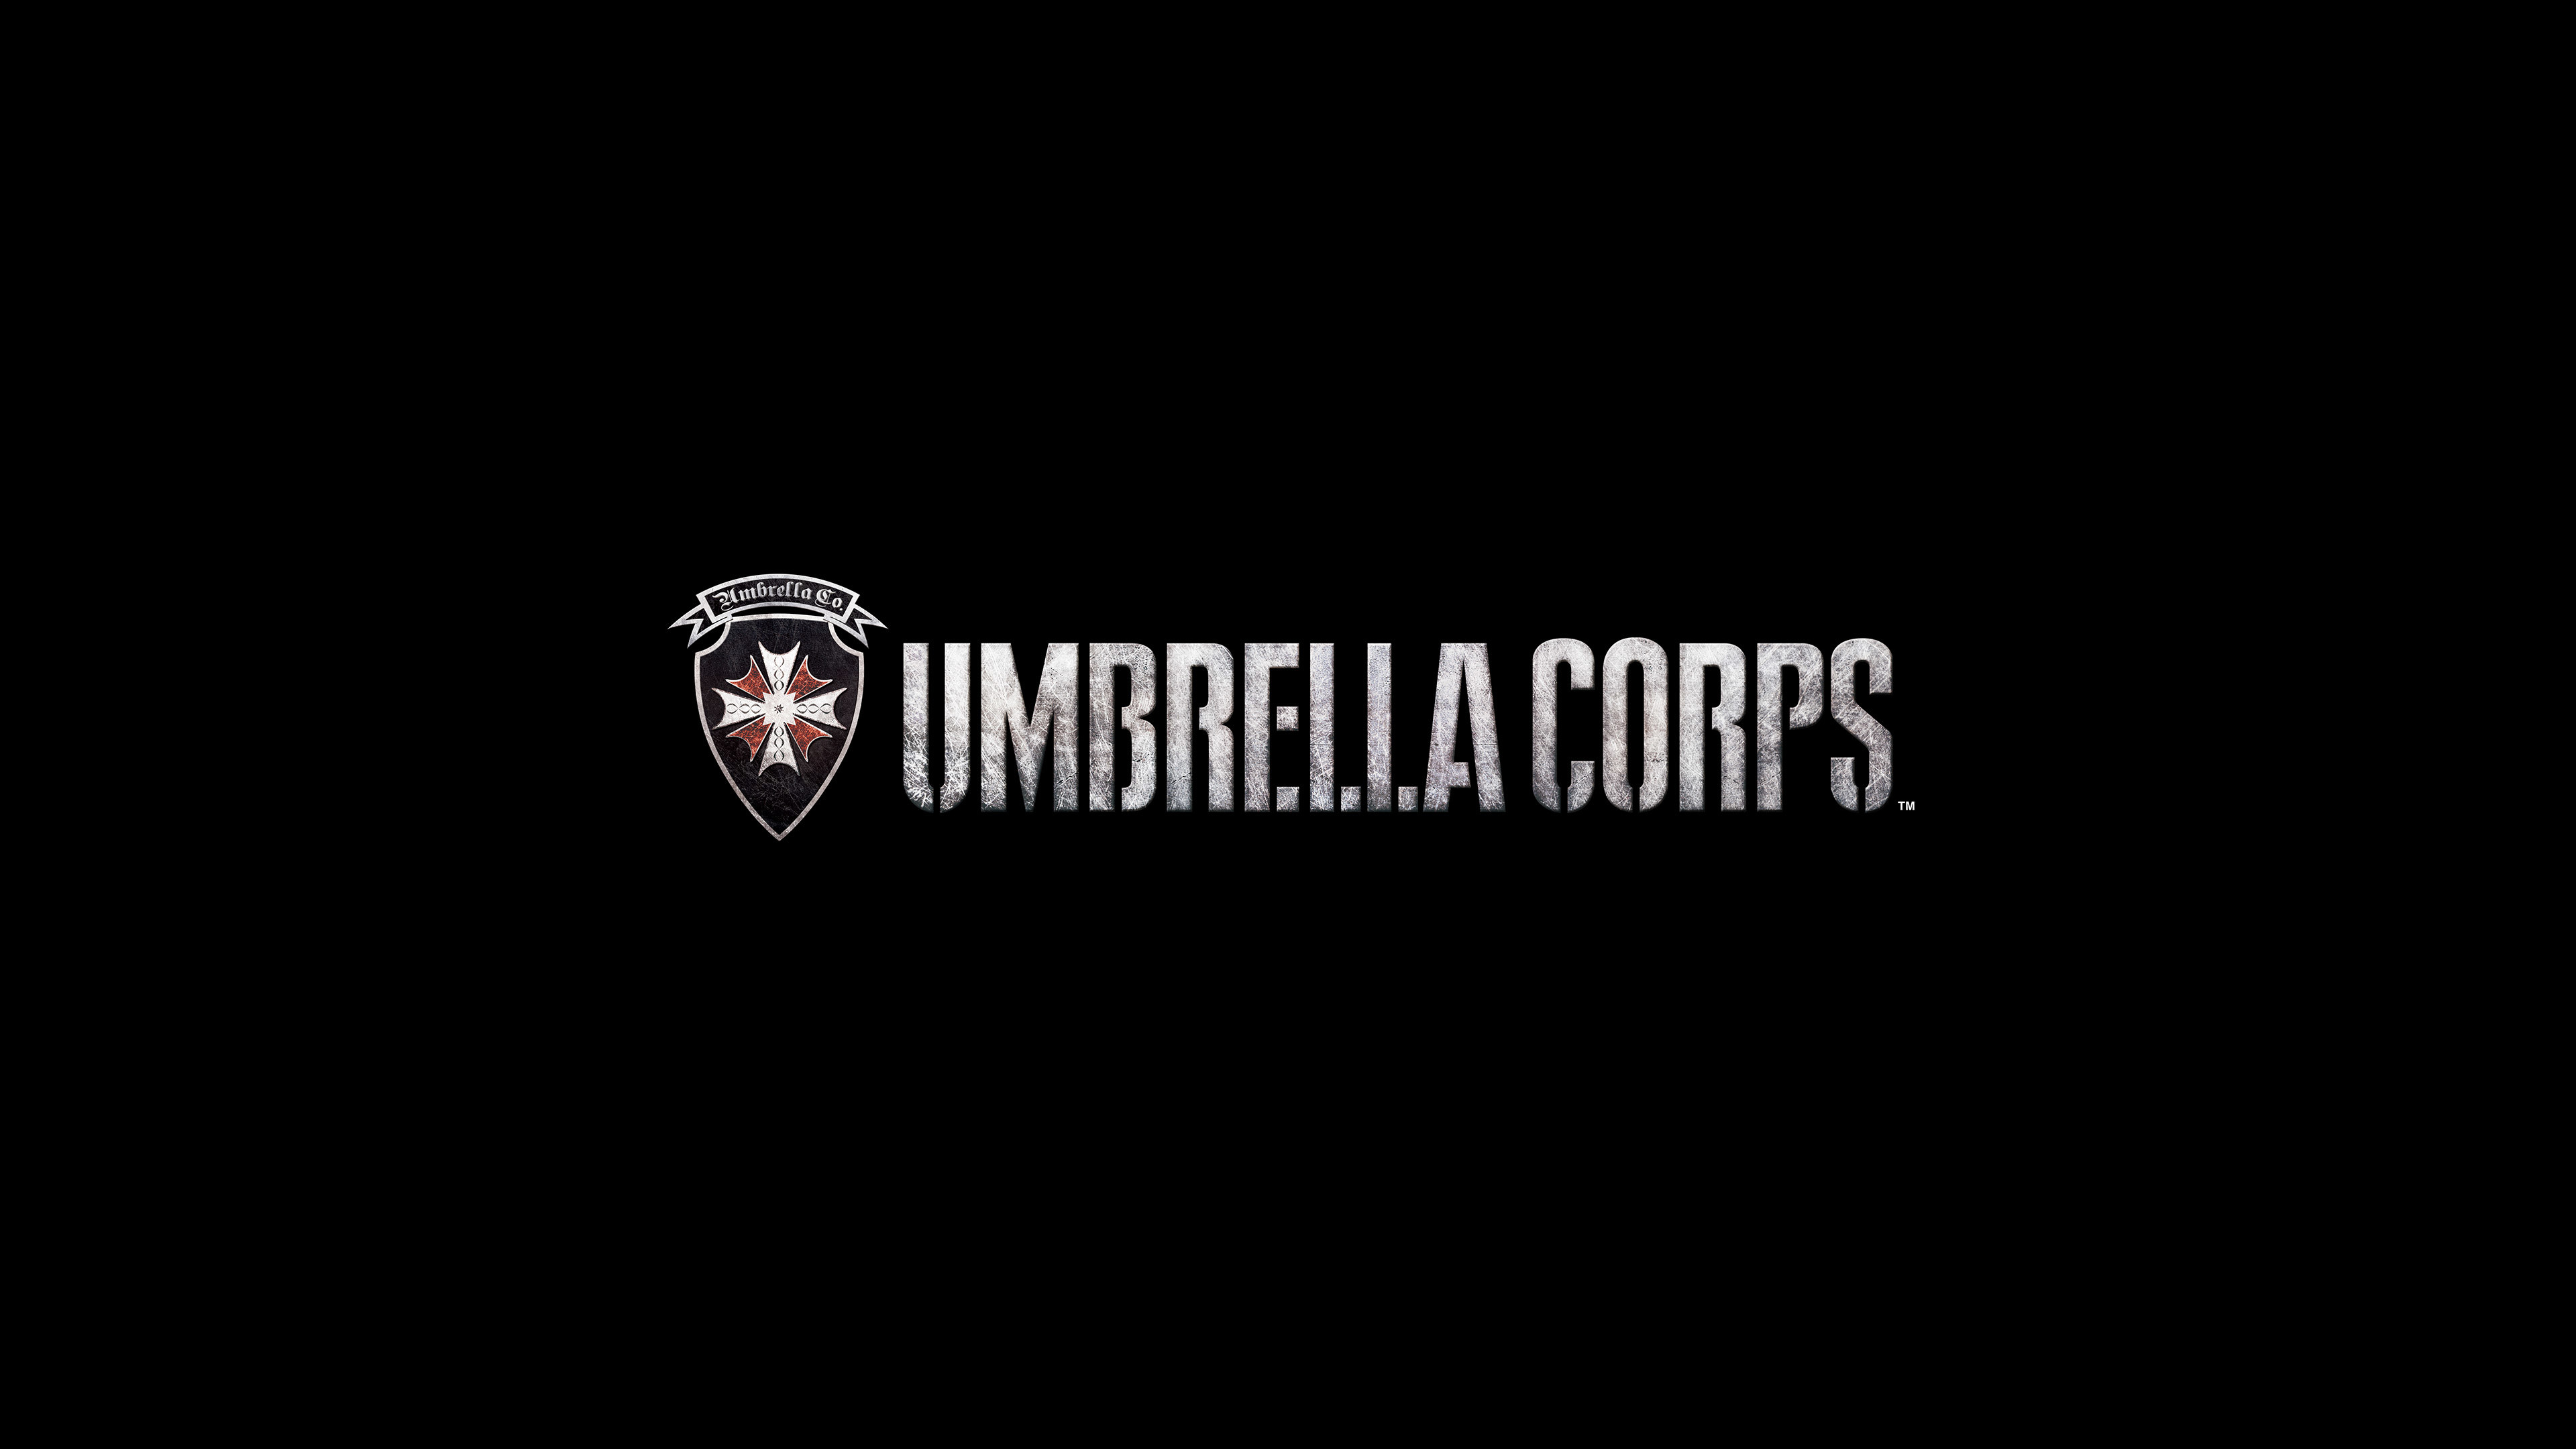 3840x2160 Umbrella Corporation Wallpaper Hd search for pictures ...